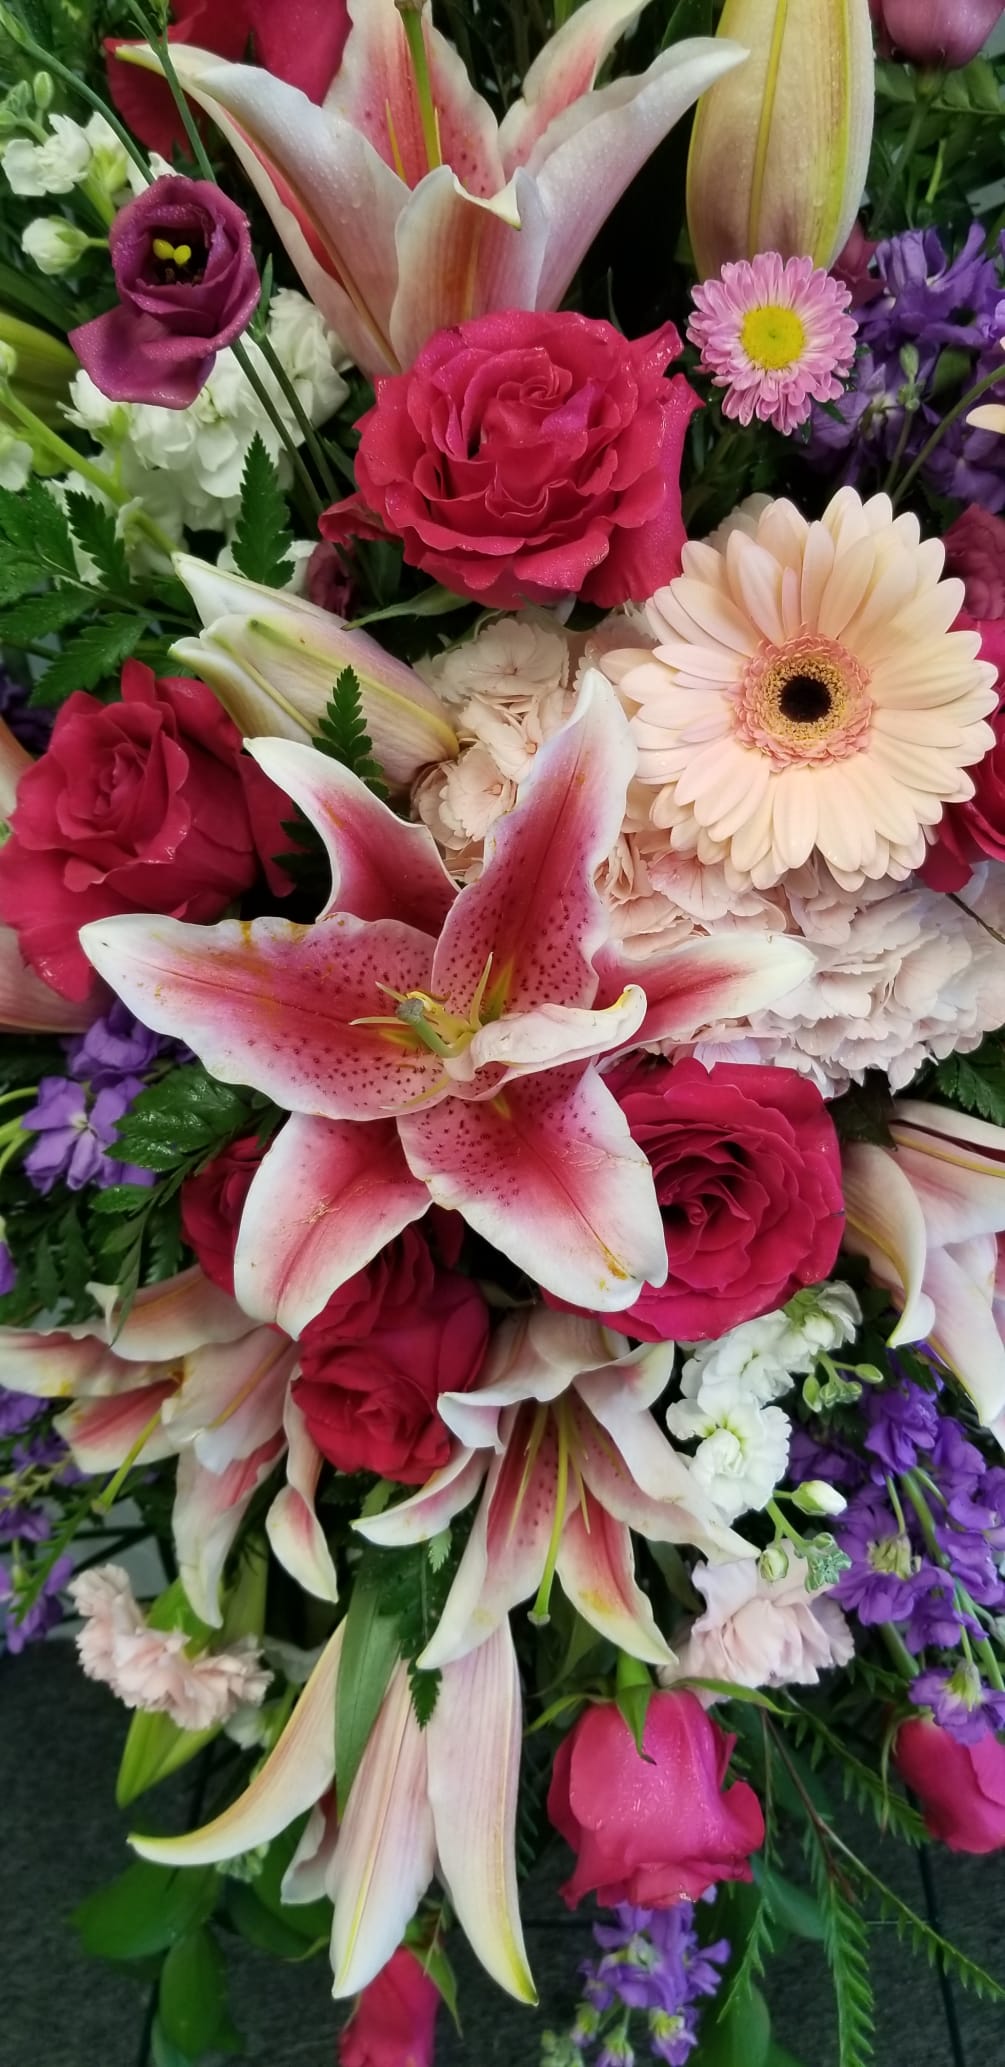 Our talented designer&#039;s will create a beautiful arrangement using premium specialty flowers.